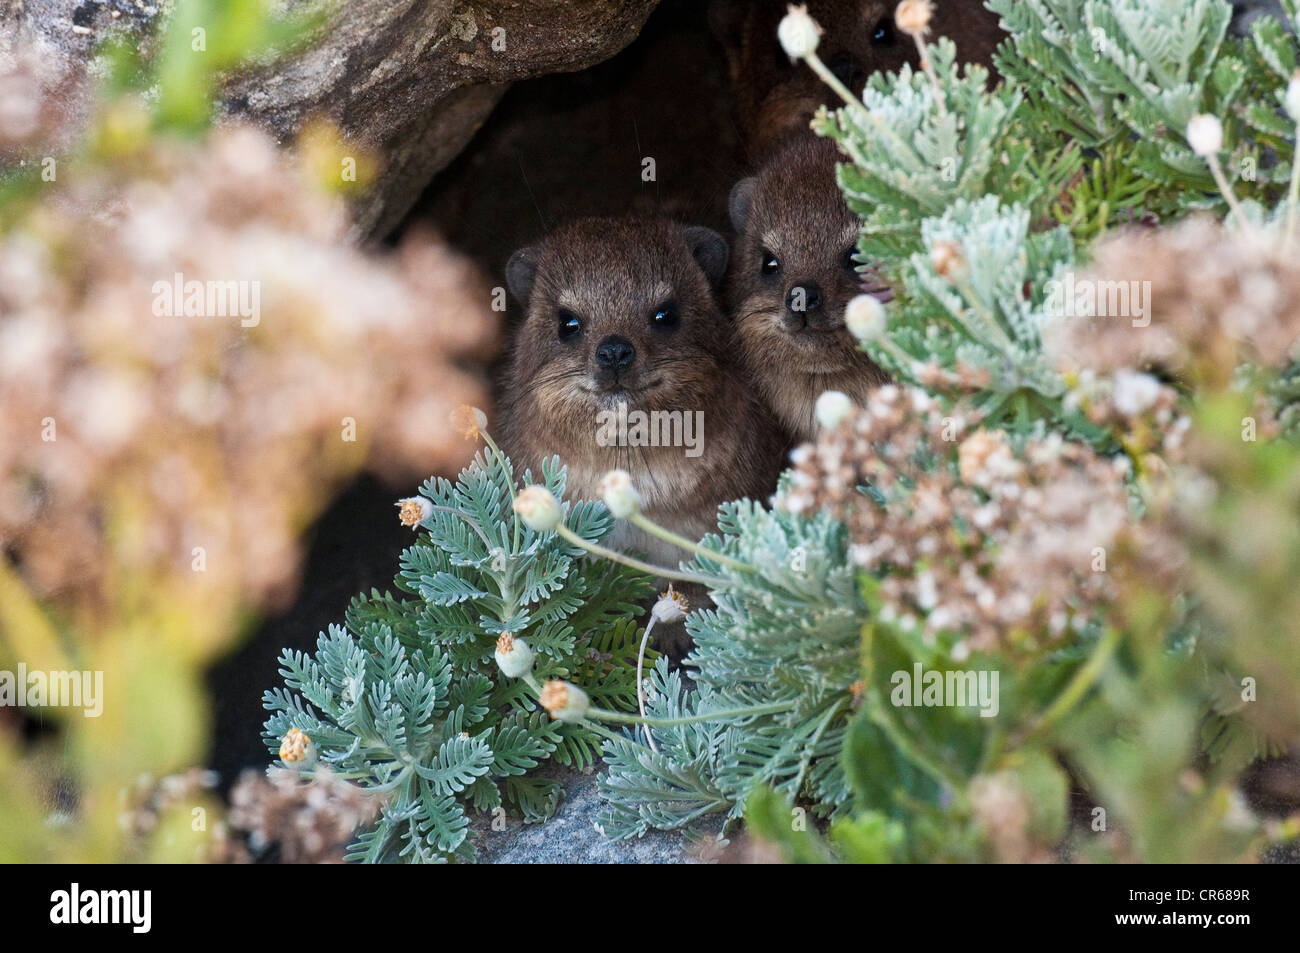 South Africa, Western Cape, Cape Peninsula, Table Mountain National Park, Rock Hyrax (Procavia capensis) Stock Photo